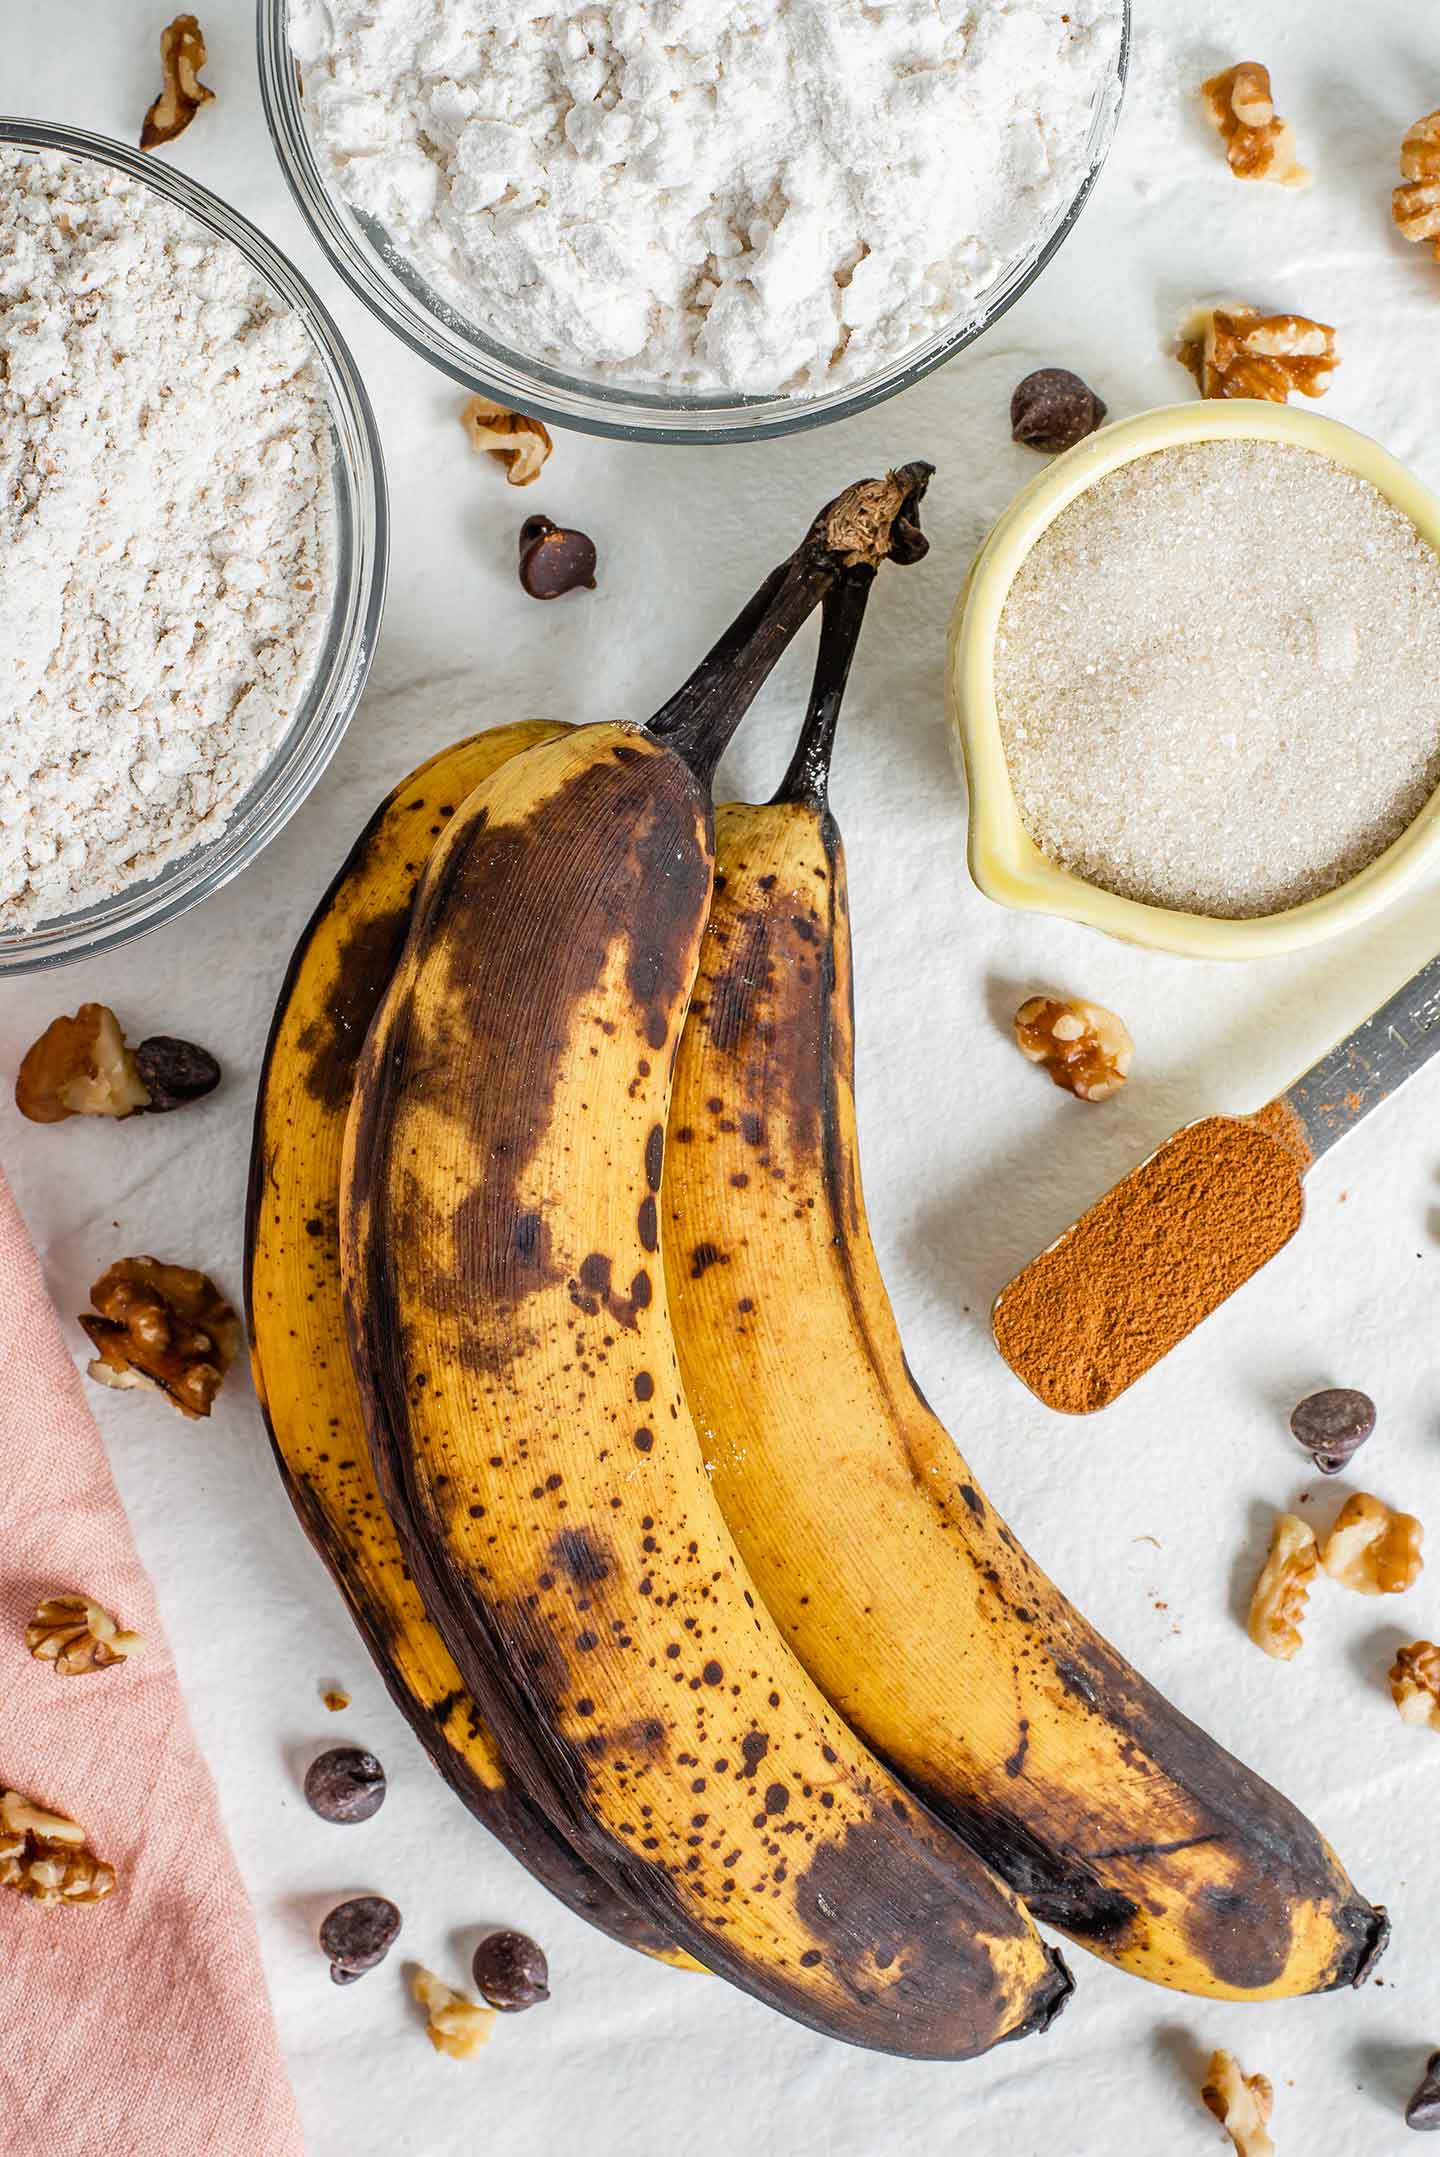 Top down view of ingredients on a white tray. Three overripe bananas, white and whole wheat flour, cane sugar, and cinnamon are pictured.